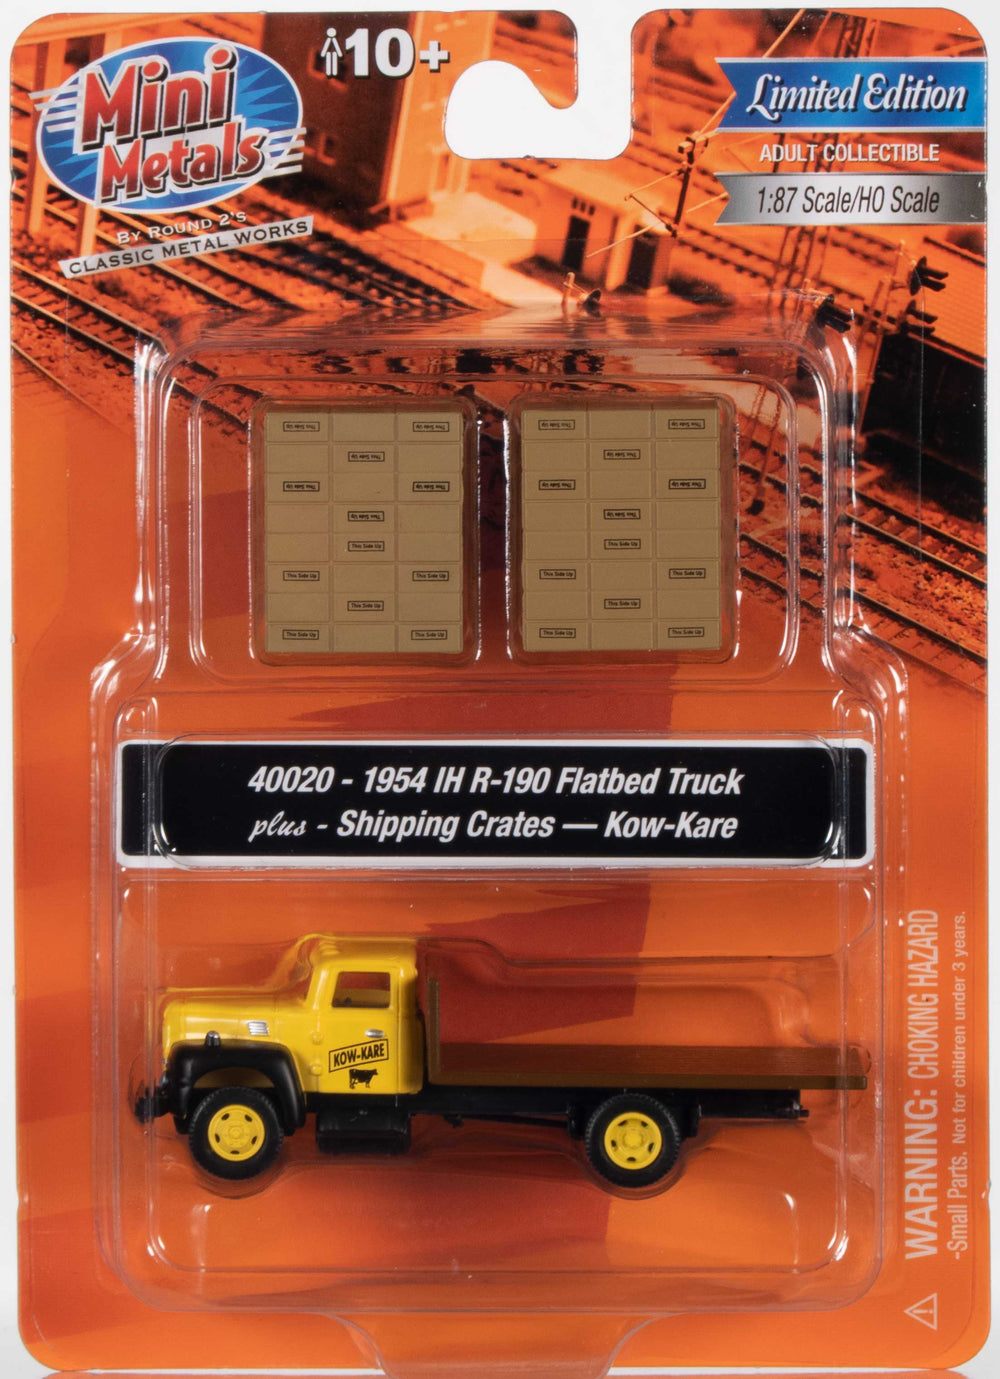 Classic Metal Works I.H. R-190 Flatbed Truck w/KowKare Shipping Crates 1:87 HO Scale